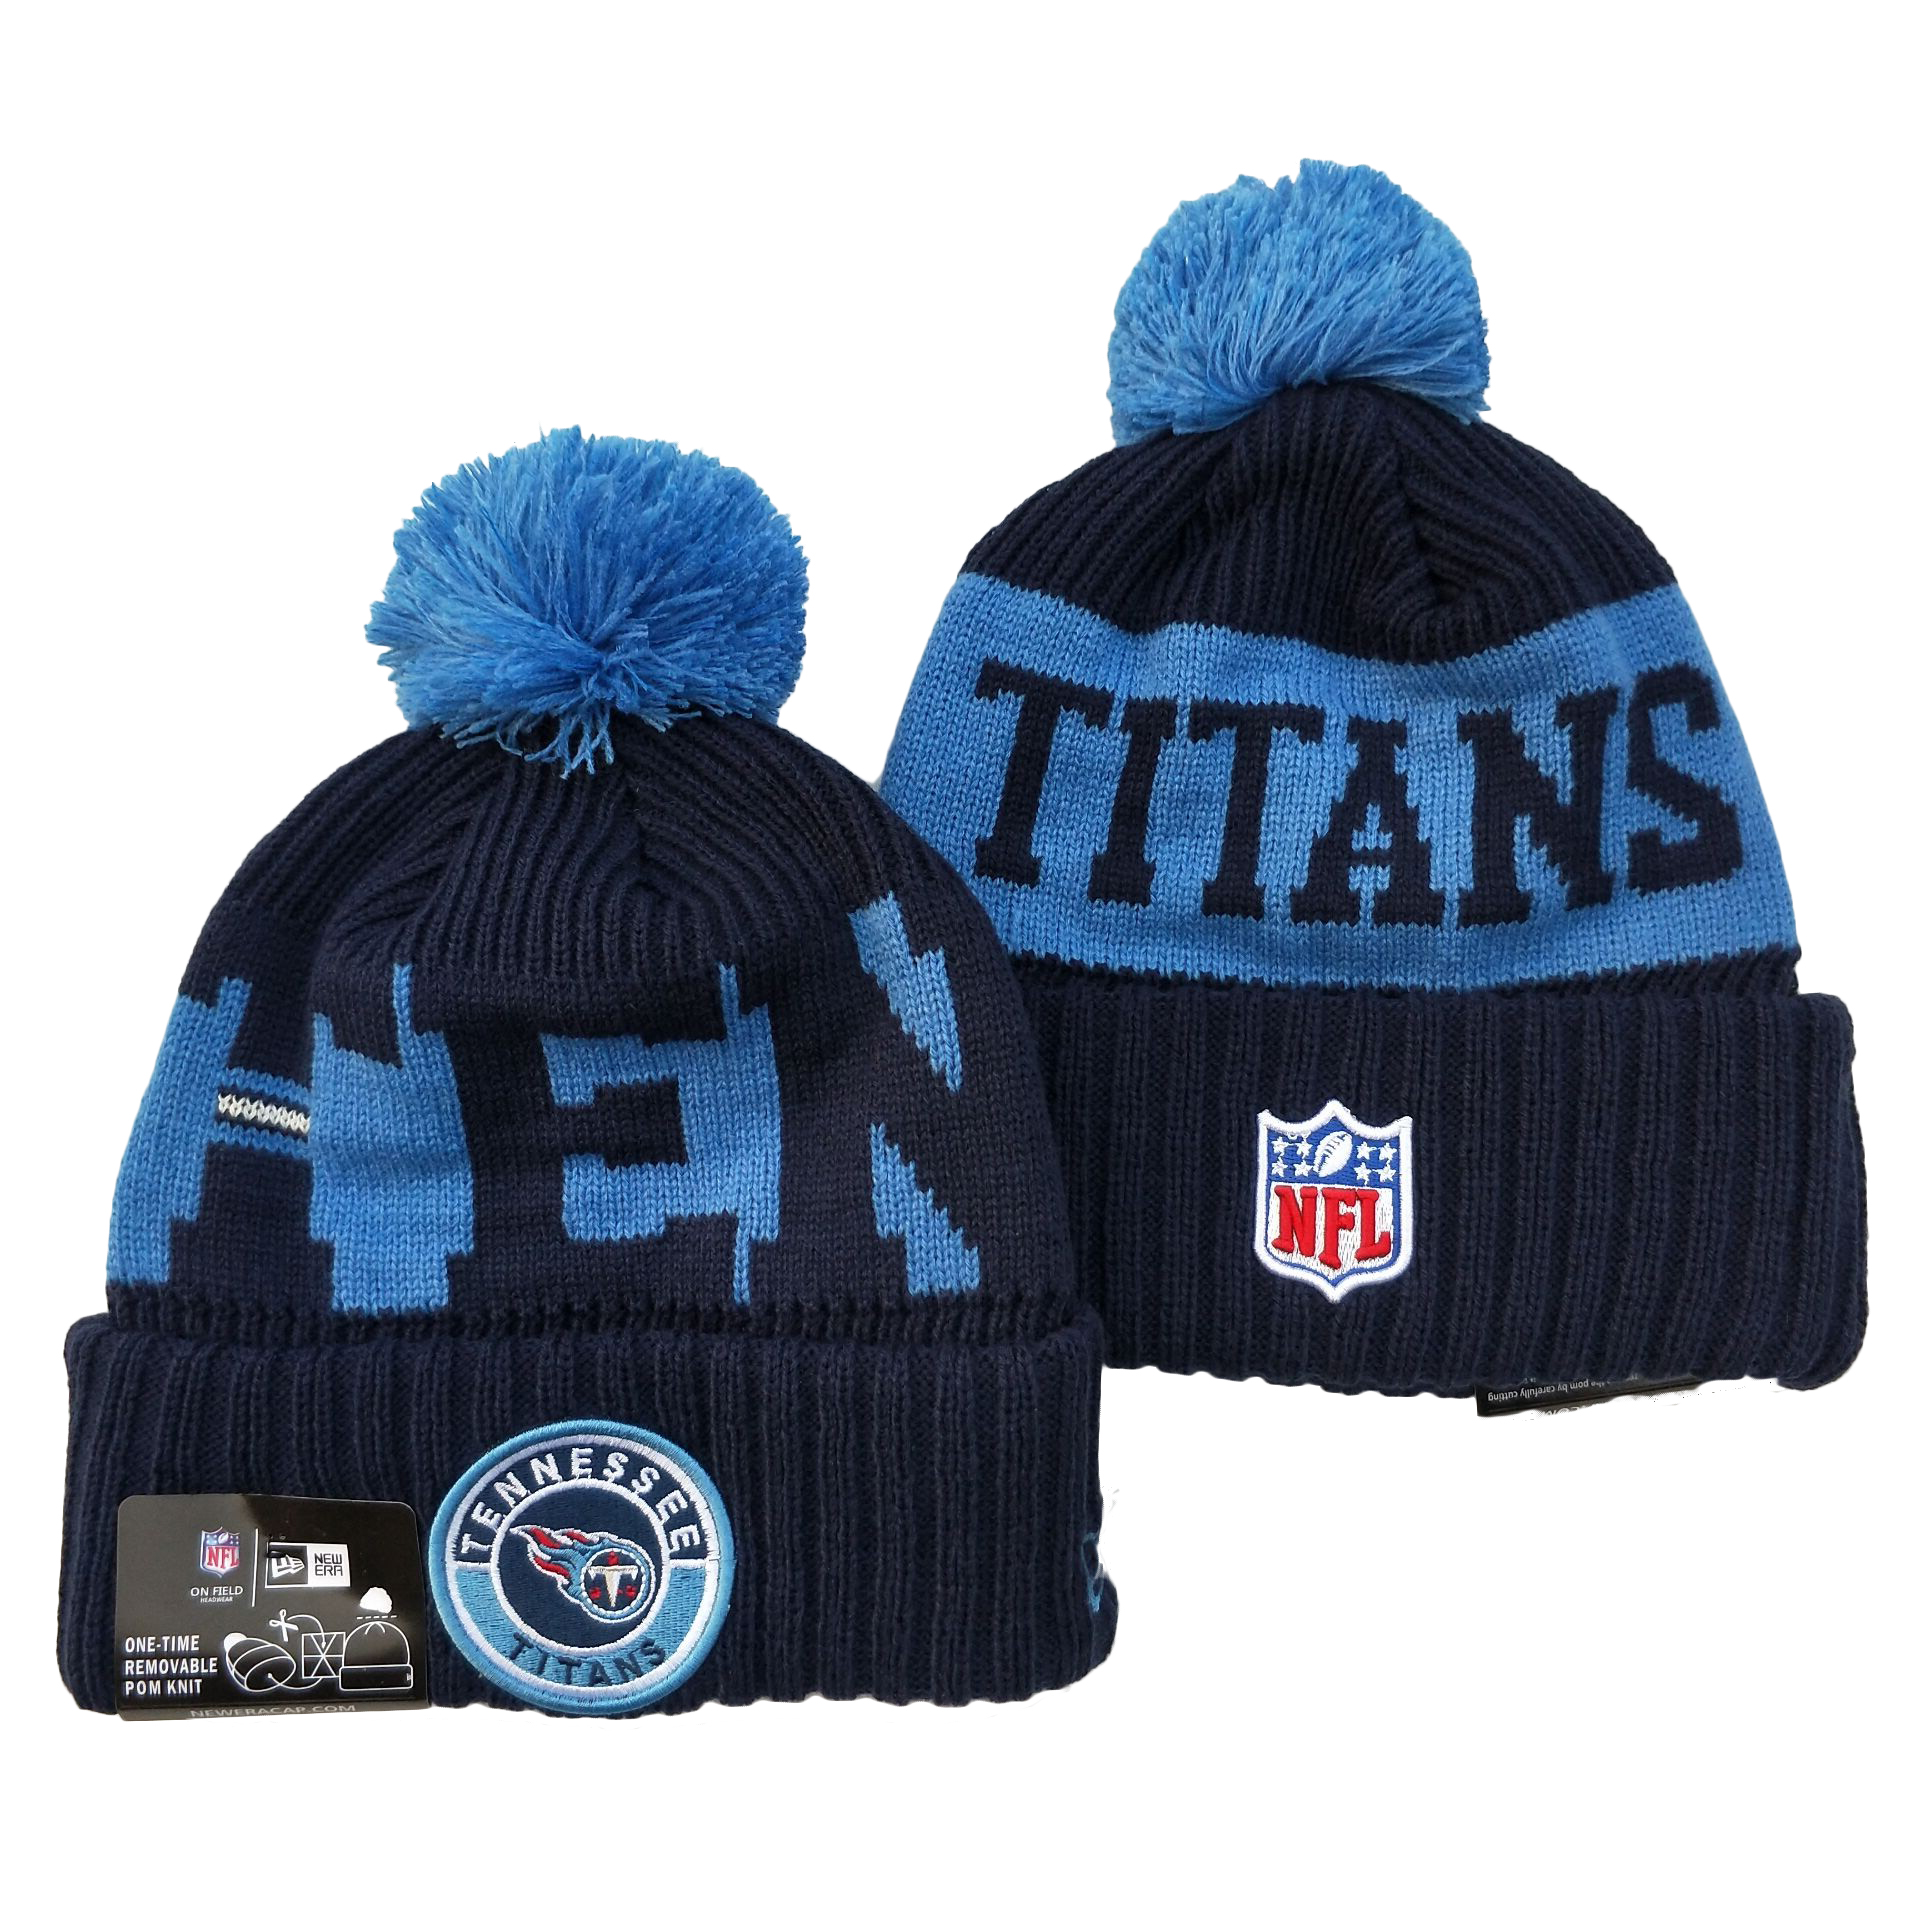 Tennessee Titans Knit Hats 020